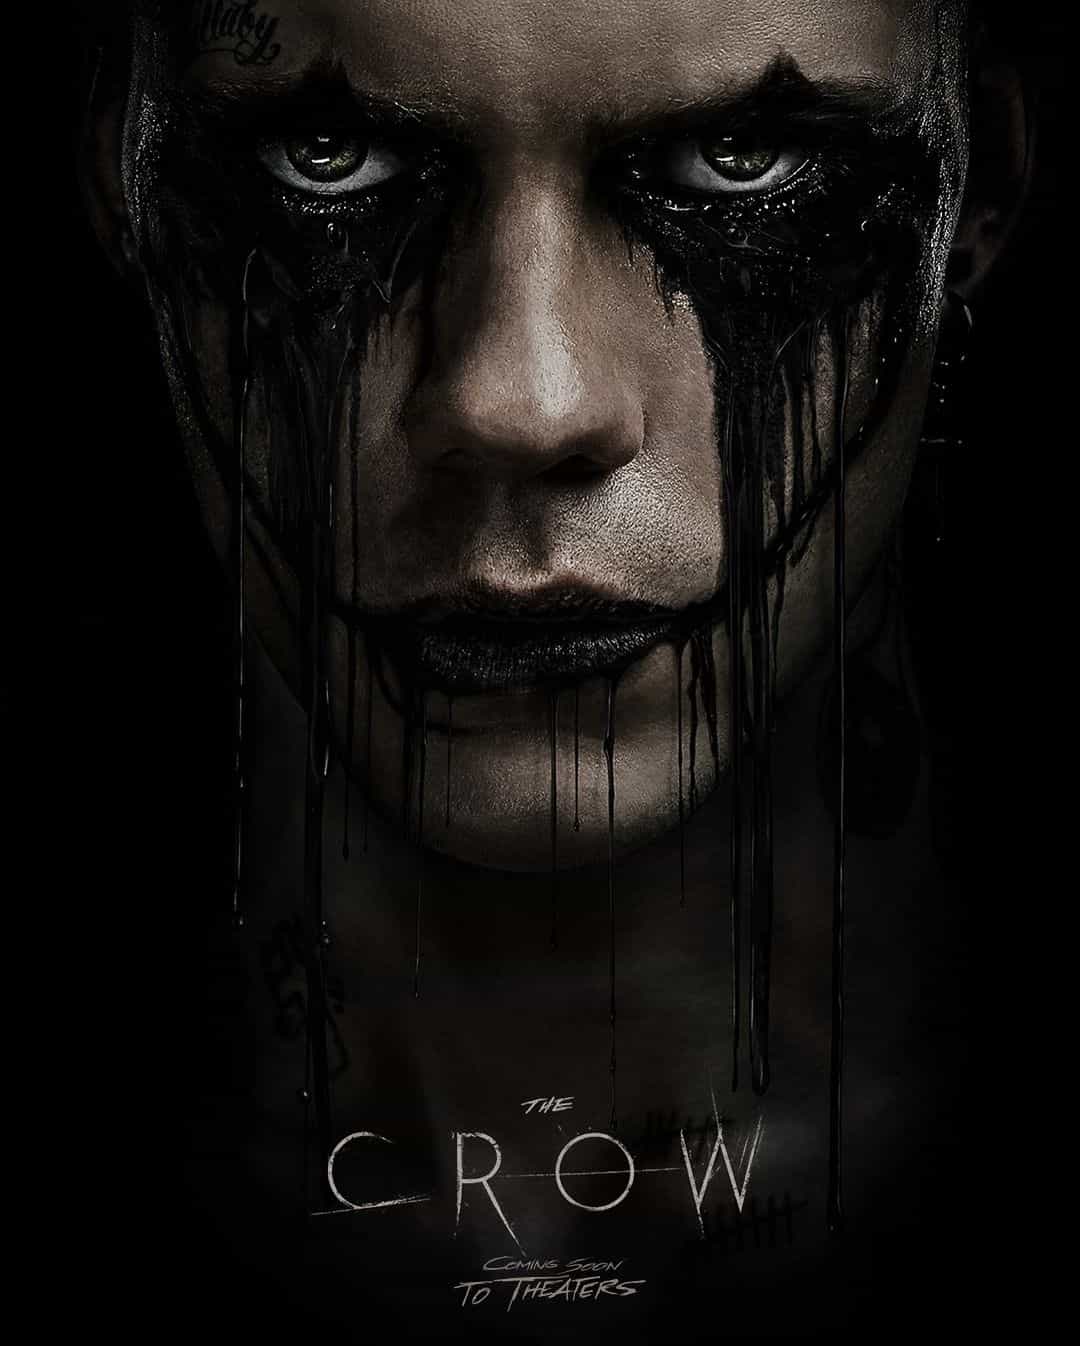 Check out the new trailer and poster for upcoming movie The Crow which stars Bill Skarsgård and FKA twigs - movie UK release date 7th July 2024 #thecrow